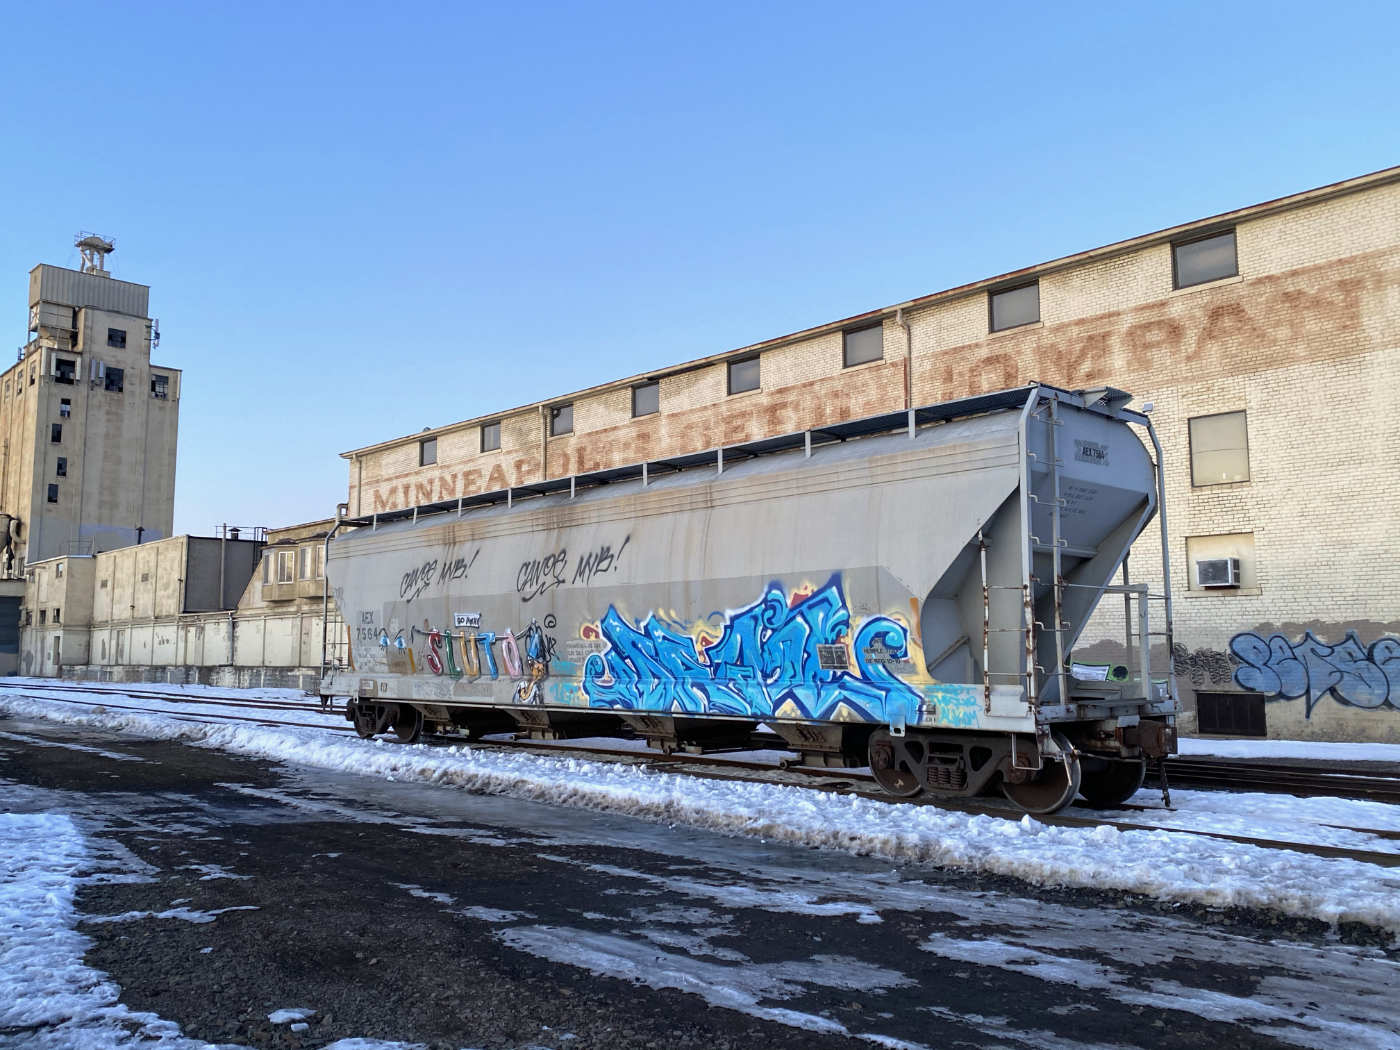 railroad car with some color graffiti in front of a long yellow stone building labeled MINEAPPLIS SEED COMPANY with a tall grain elevator against a blue sky